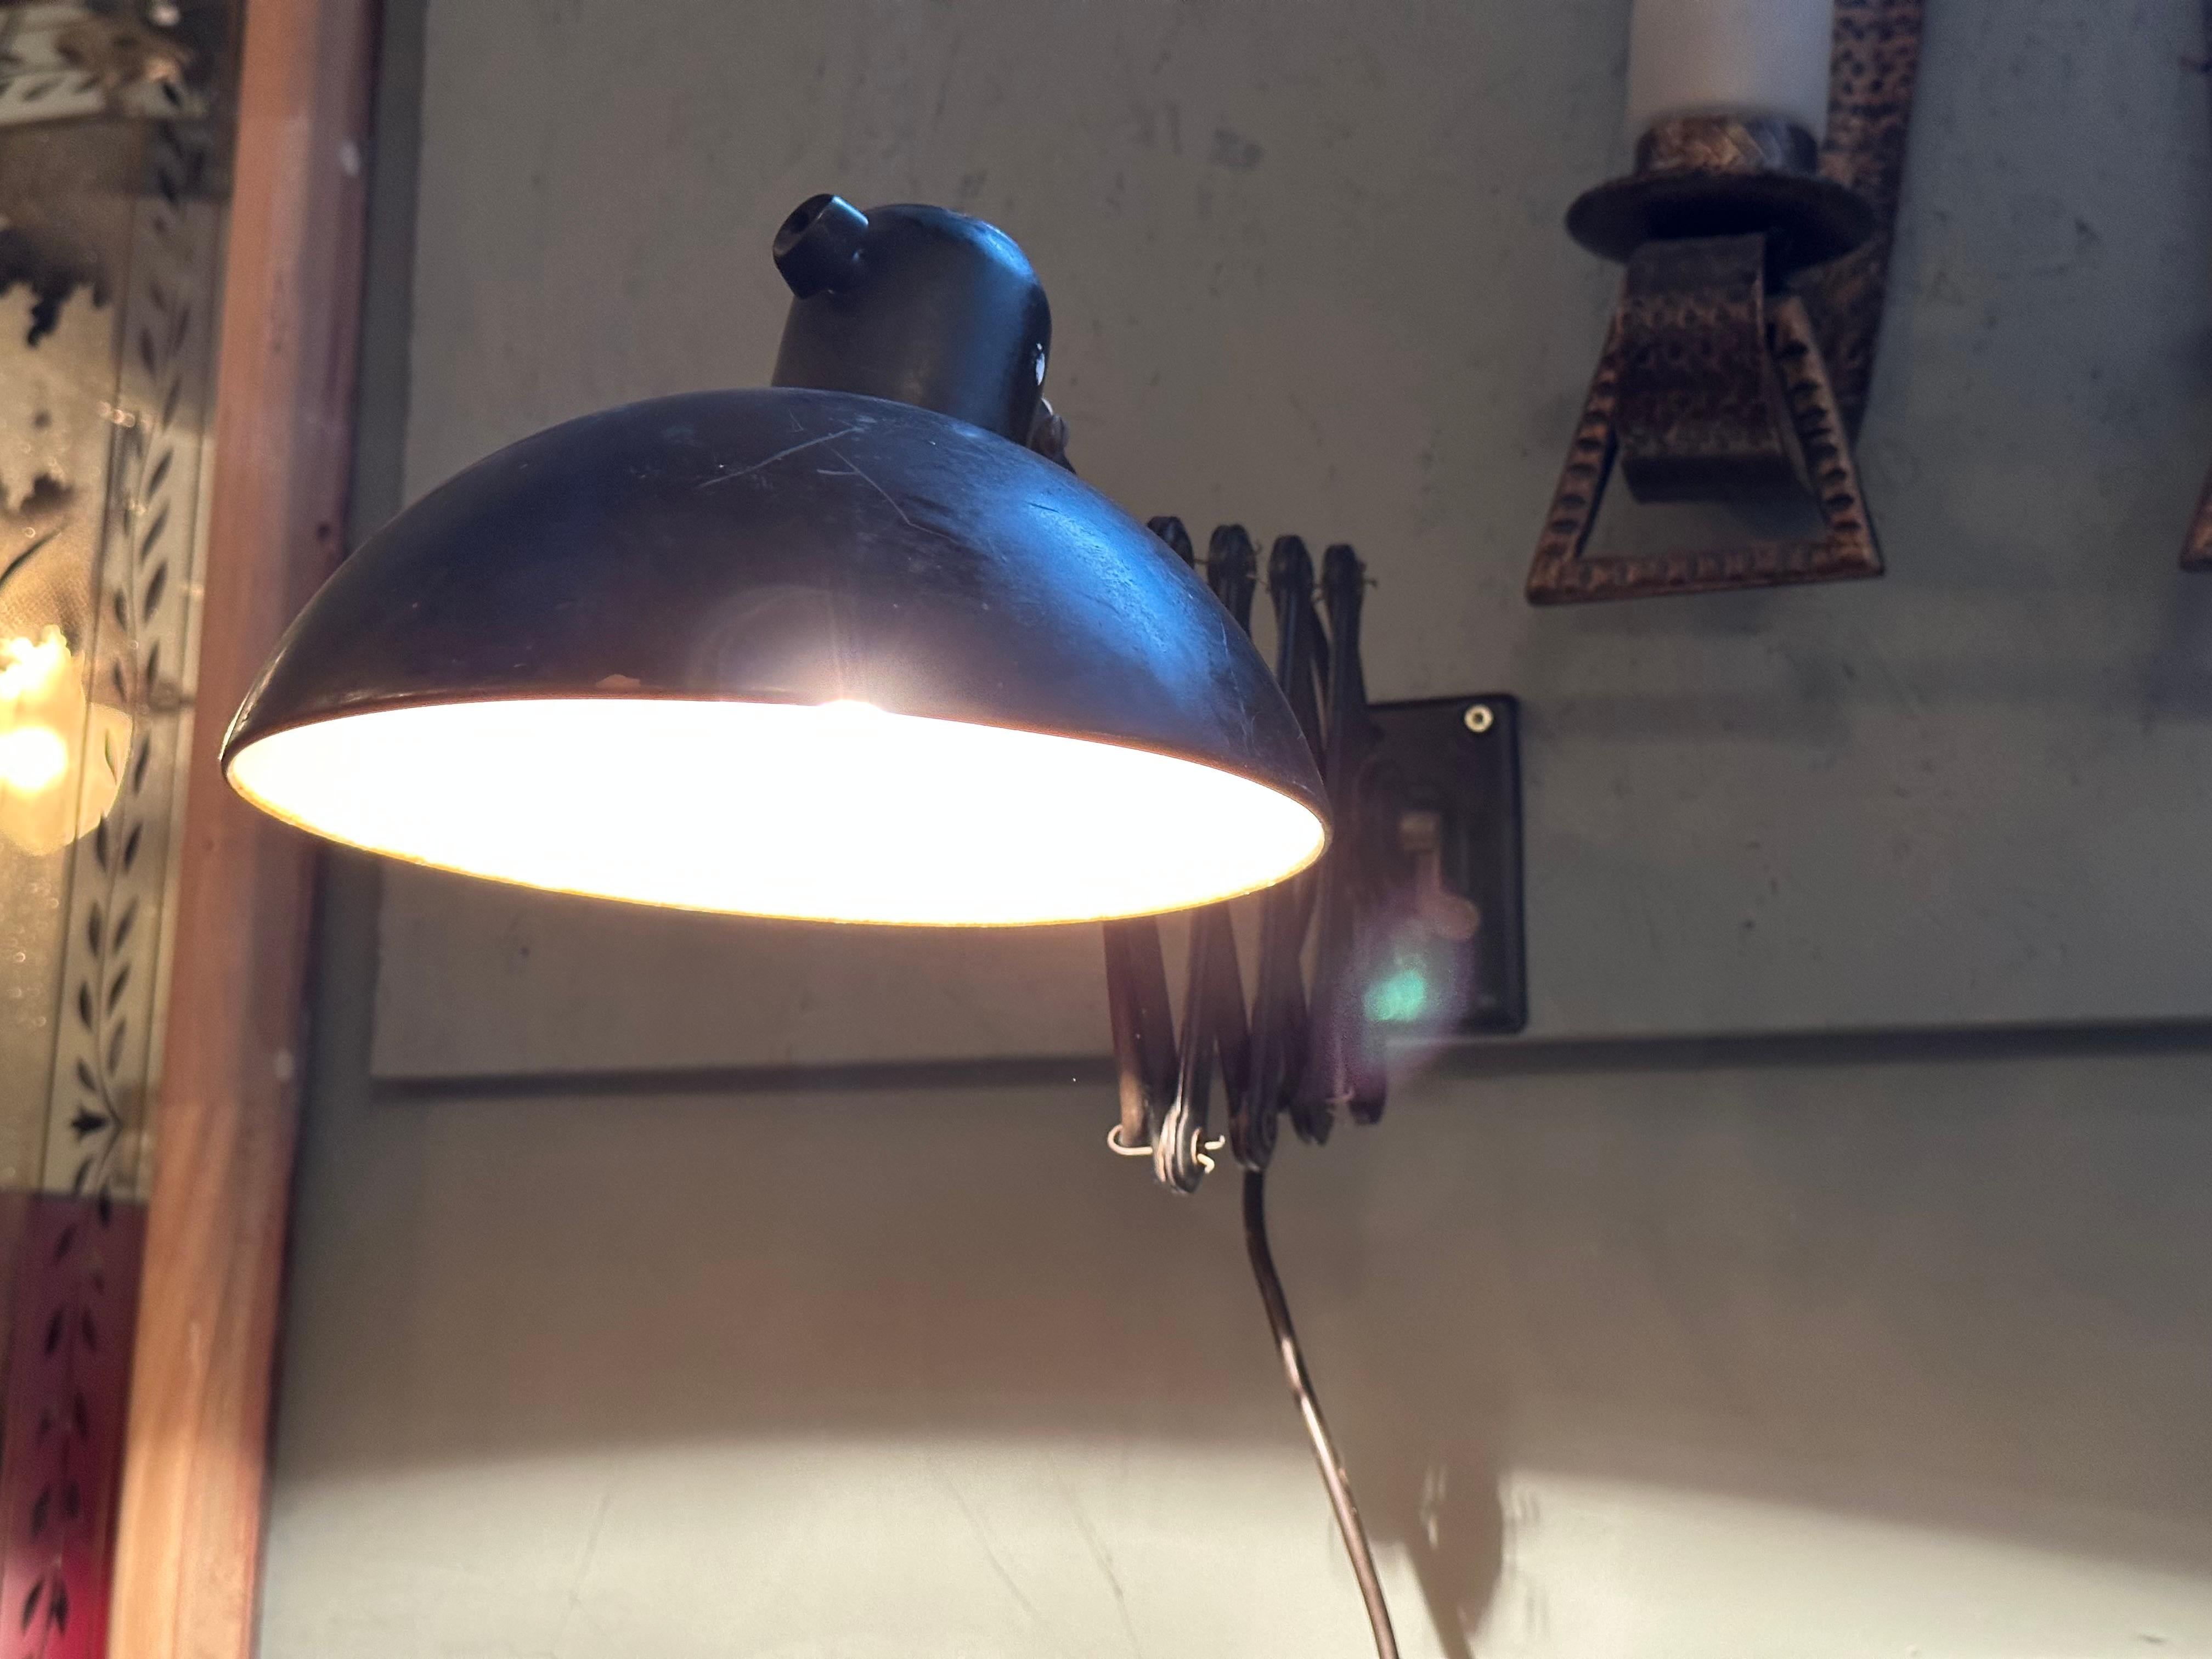 Art Deco Wall Scissor Lamp No. 6718 by Christian Dell for Kaiser, Germany 1935.
complete. switch works properly.
good vintage condition. very nice vintage patina, not over restored!